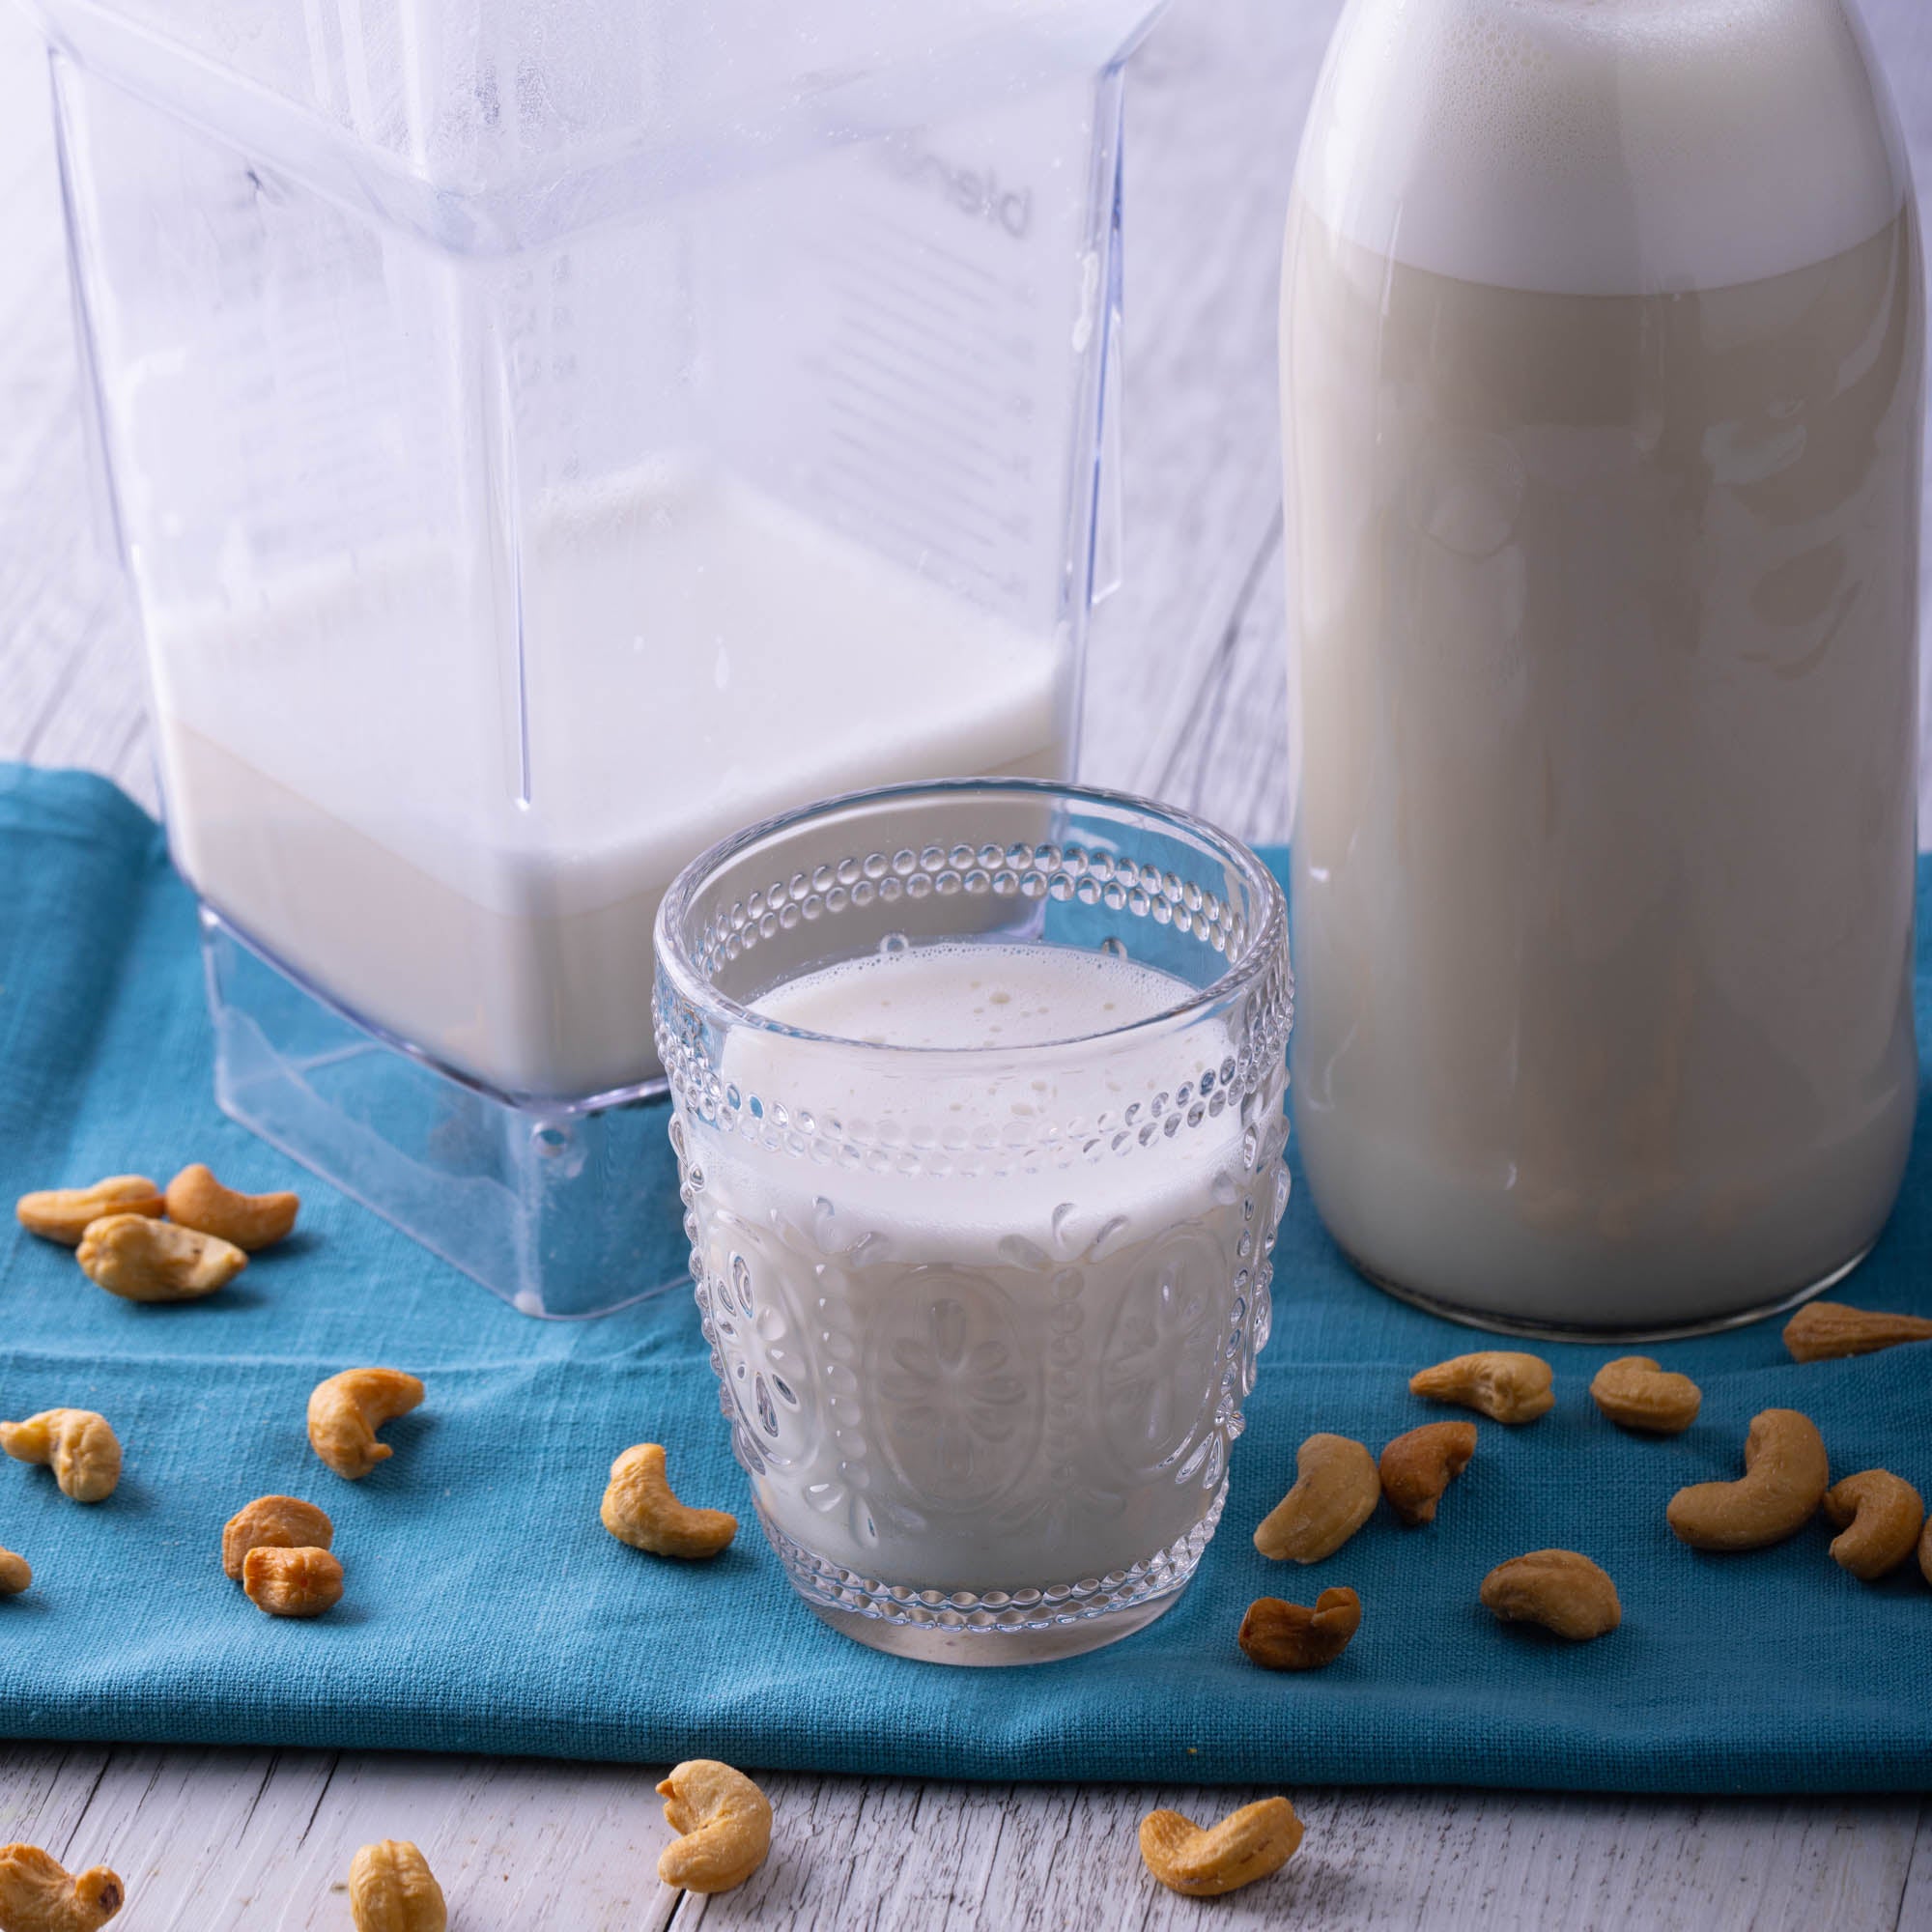 Make your own cashew milk and you could save over $1,000 per year